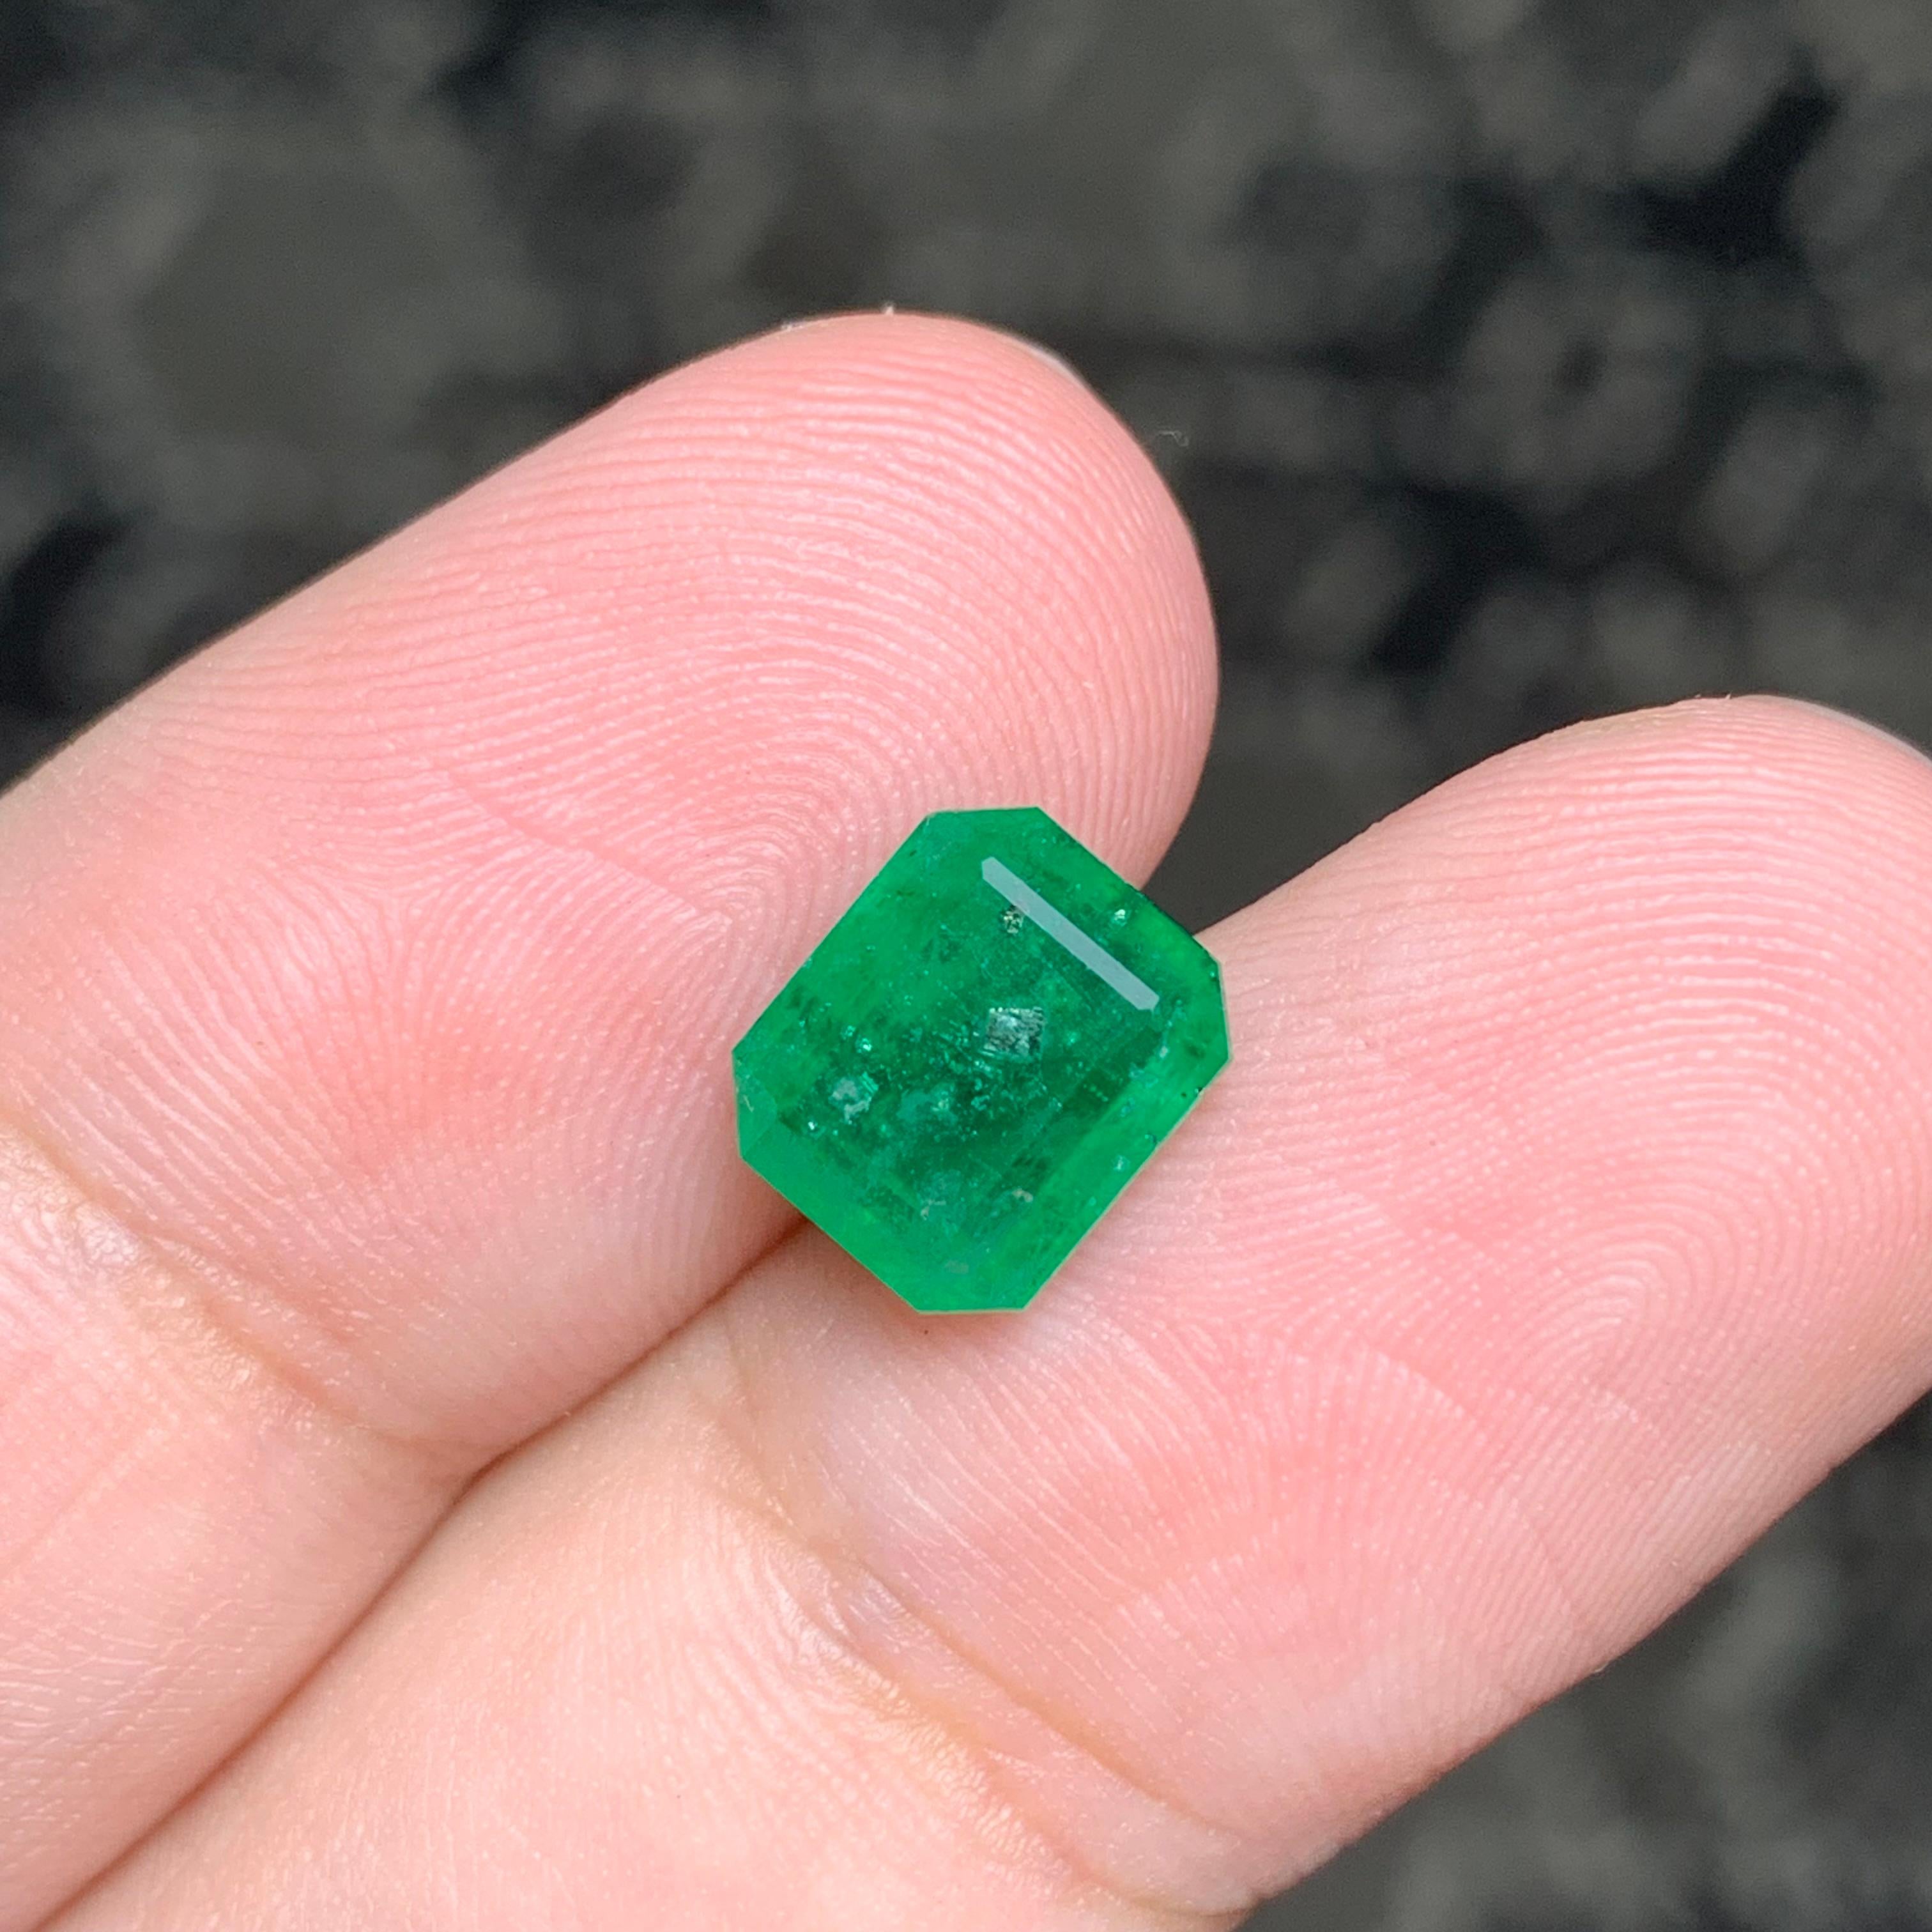 Loose Emerald
Weight: 2.85 Carats
Dimensions: 8.8 x 7.5 x 4.8 Mm
Origin: Swat Pakistan
Shape: Emerald
Color: Green
Treatment: Non
Certificate: On Demand

The Swat Emerald, also known as the Mingora Emerald, is a rare and highly prized gemstone